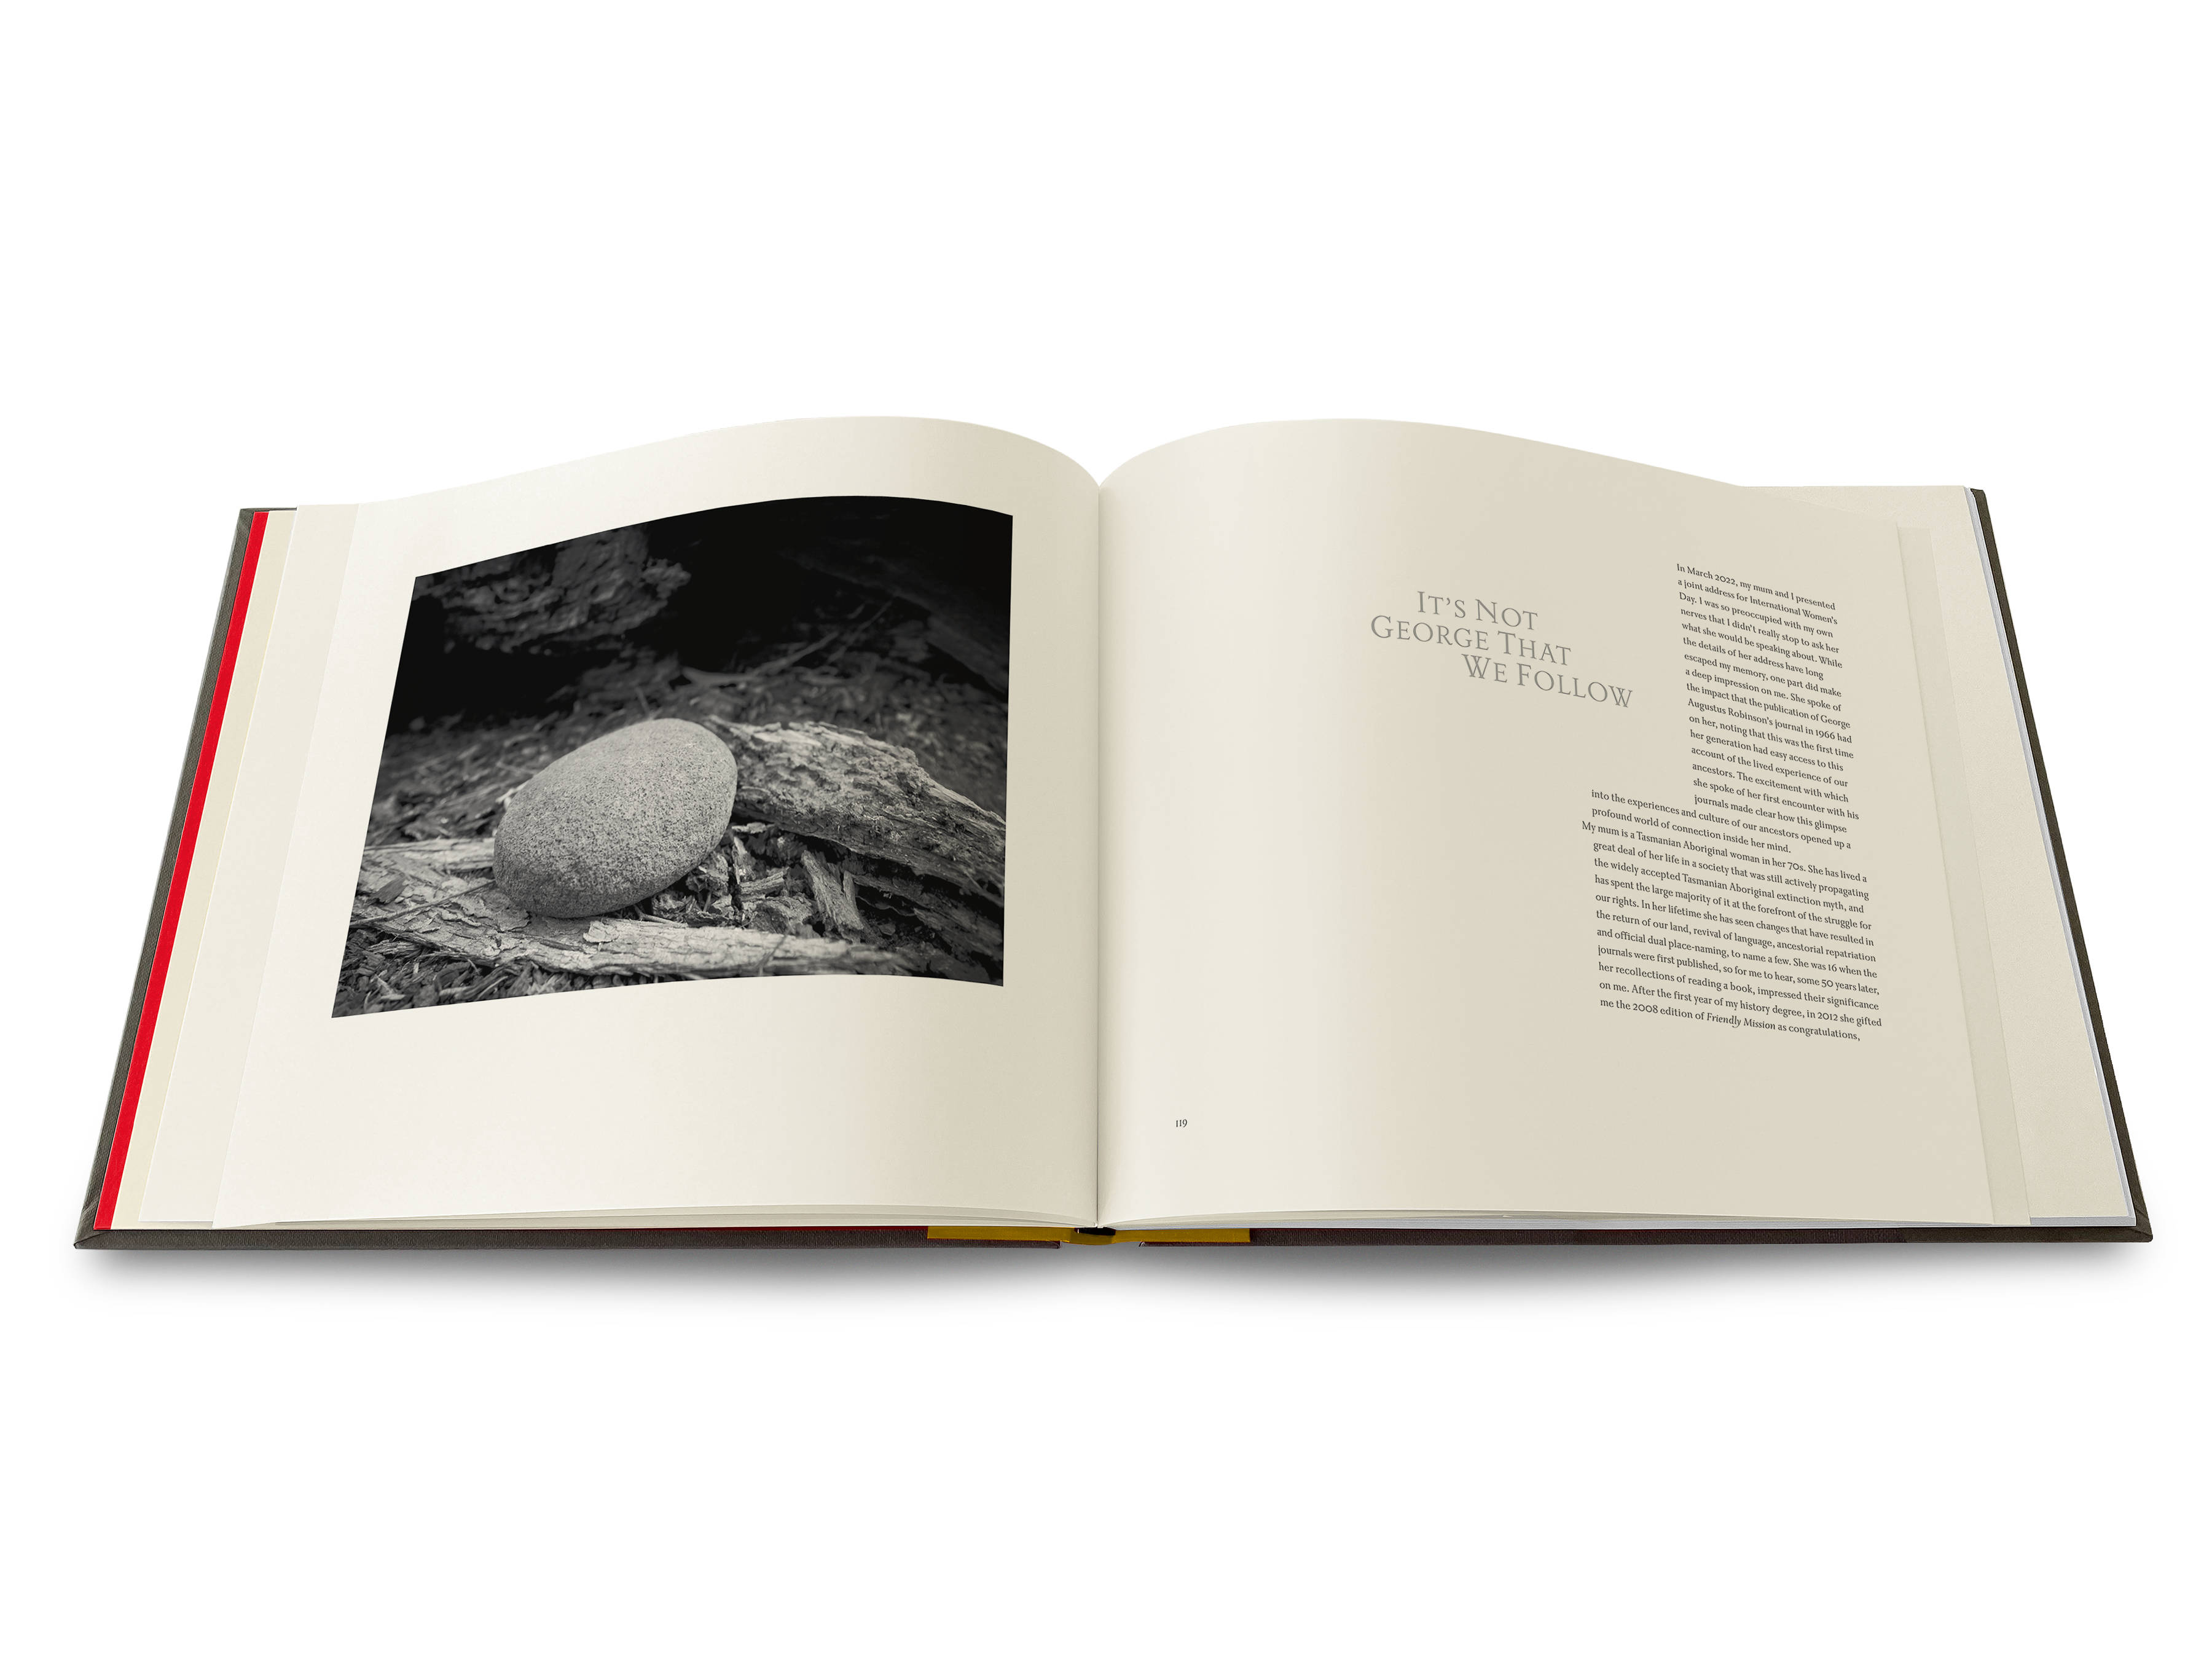 An image of a double-page spread from the Uninnocent Landscapes book with an image of a round river stone on the left and a text page with the words ‘It’s not George that we follow’ on the right.